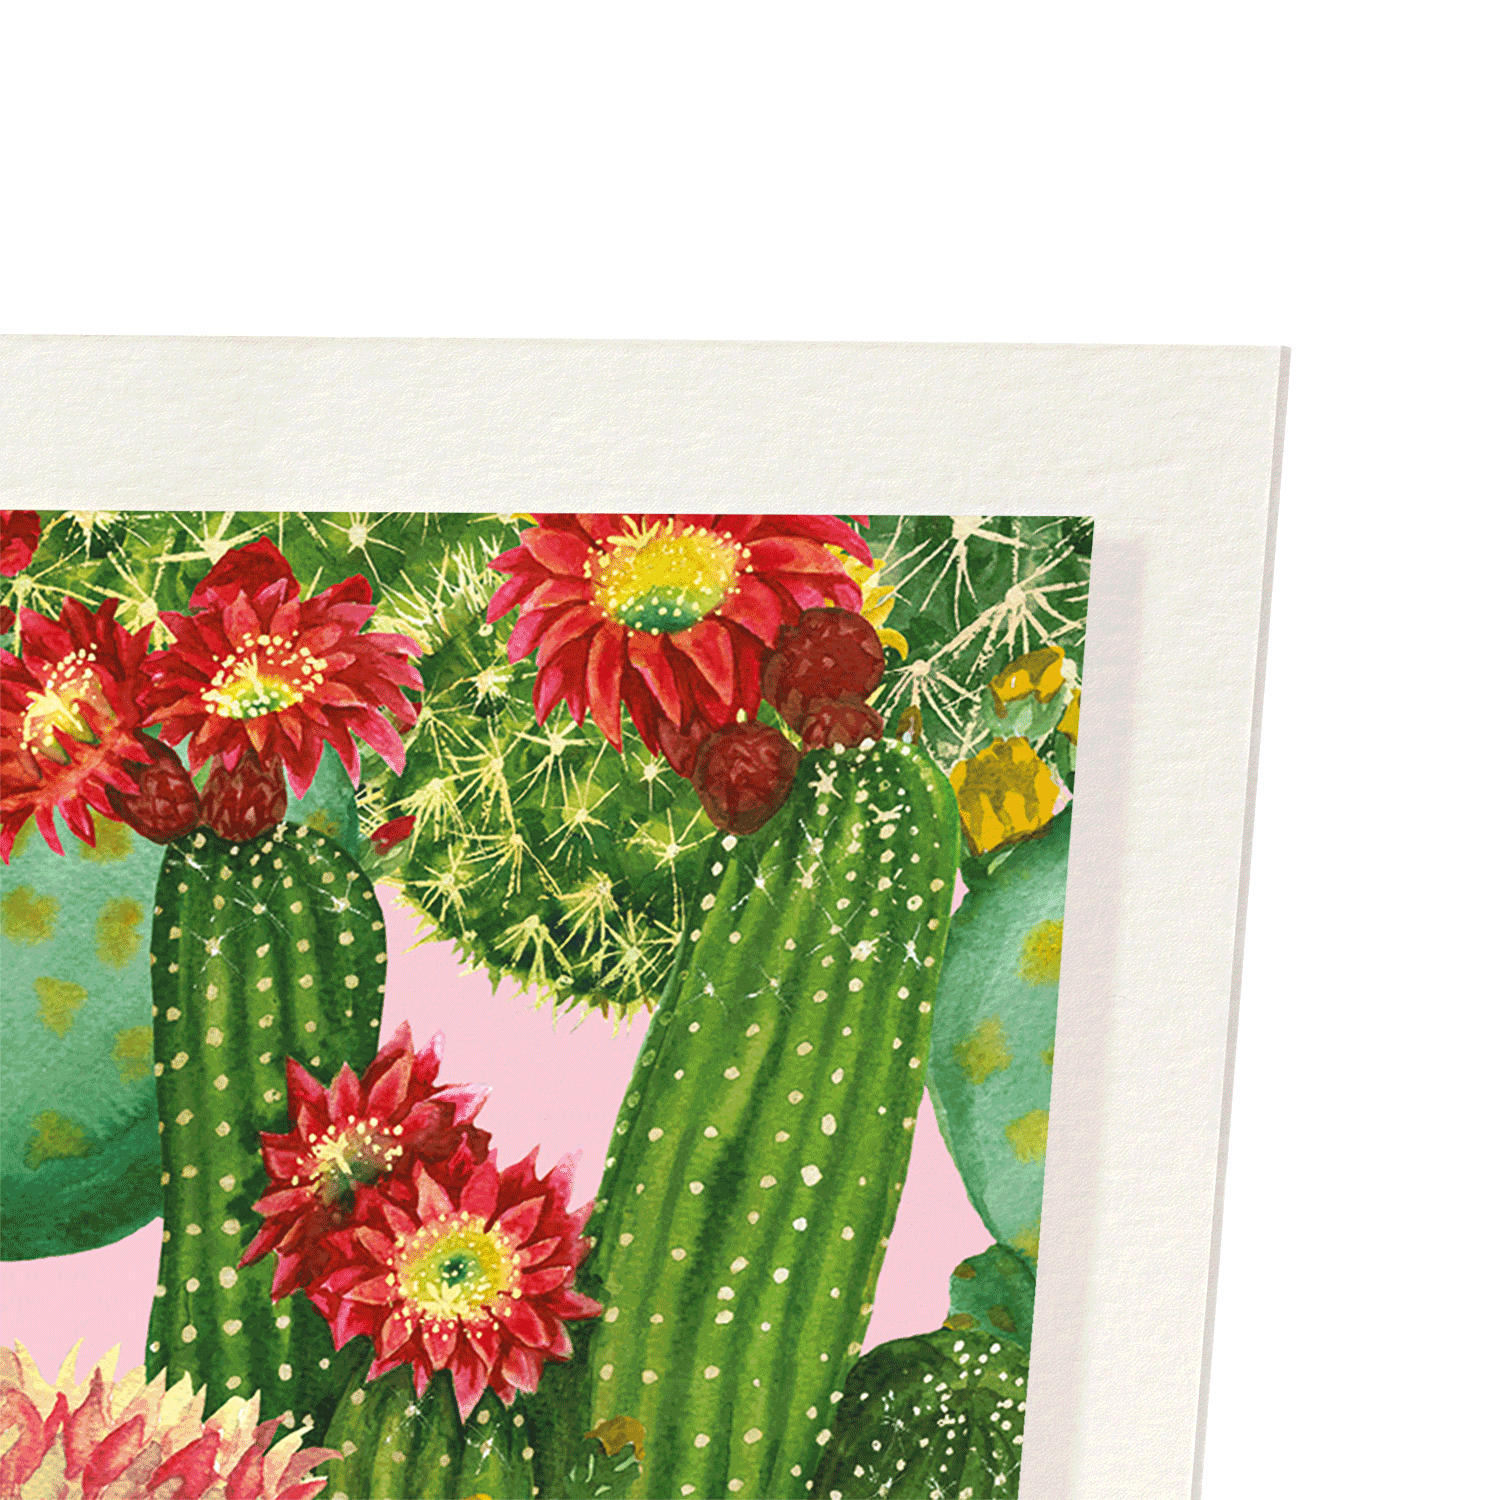 COLOURFUL CACTI: Painting Art Print